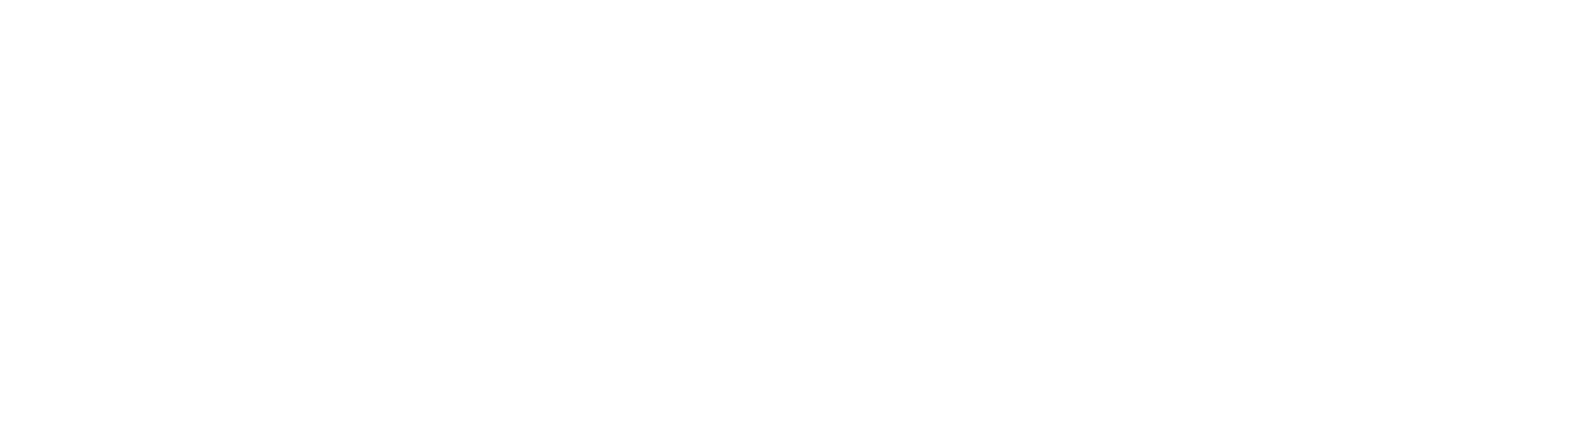 Distell Group logo large for dark backgrounds (transparent PNG)